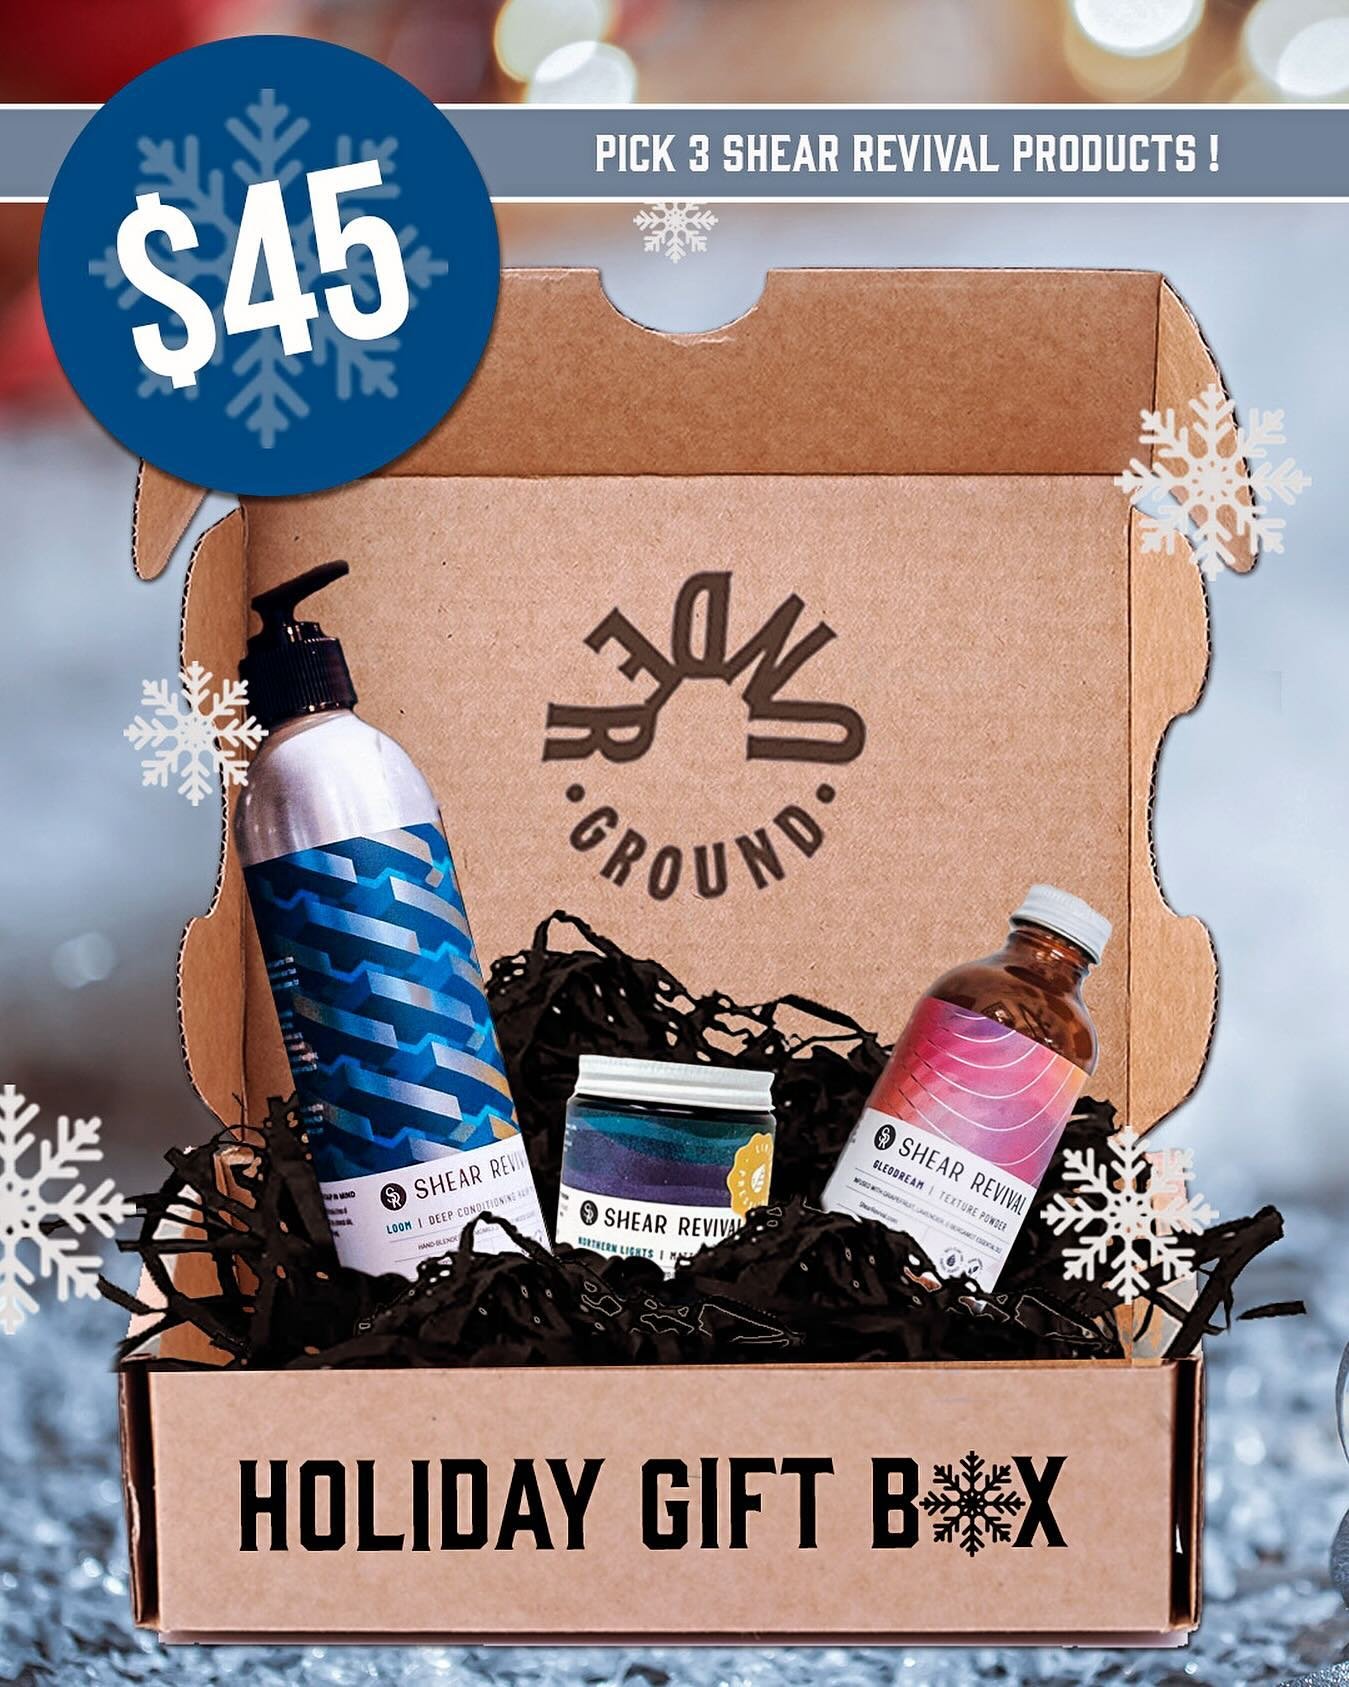 HOLIDAY GIFT 🎁 BOX! Let @undergroundjxn cut the stress out of finding the perfect gift for your favorite guy this season. Starting now until Christmas, you can get our holiday gift box for only $45! You can mix and match 3 products from Shear Reviva